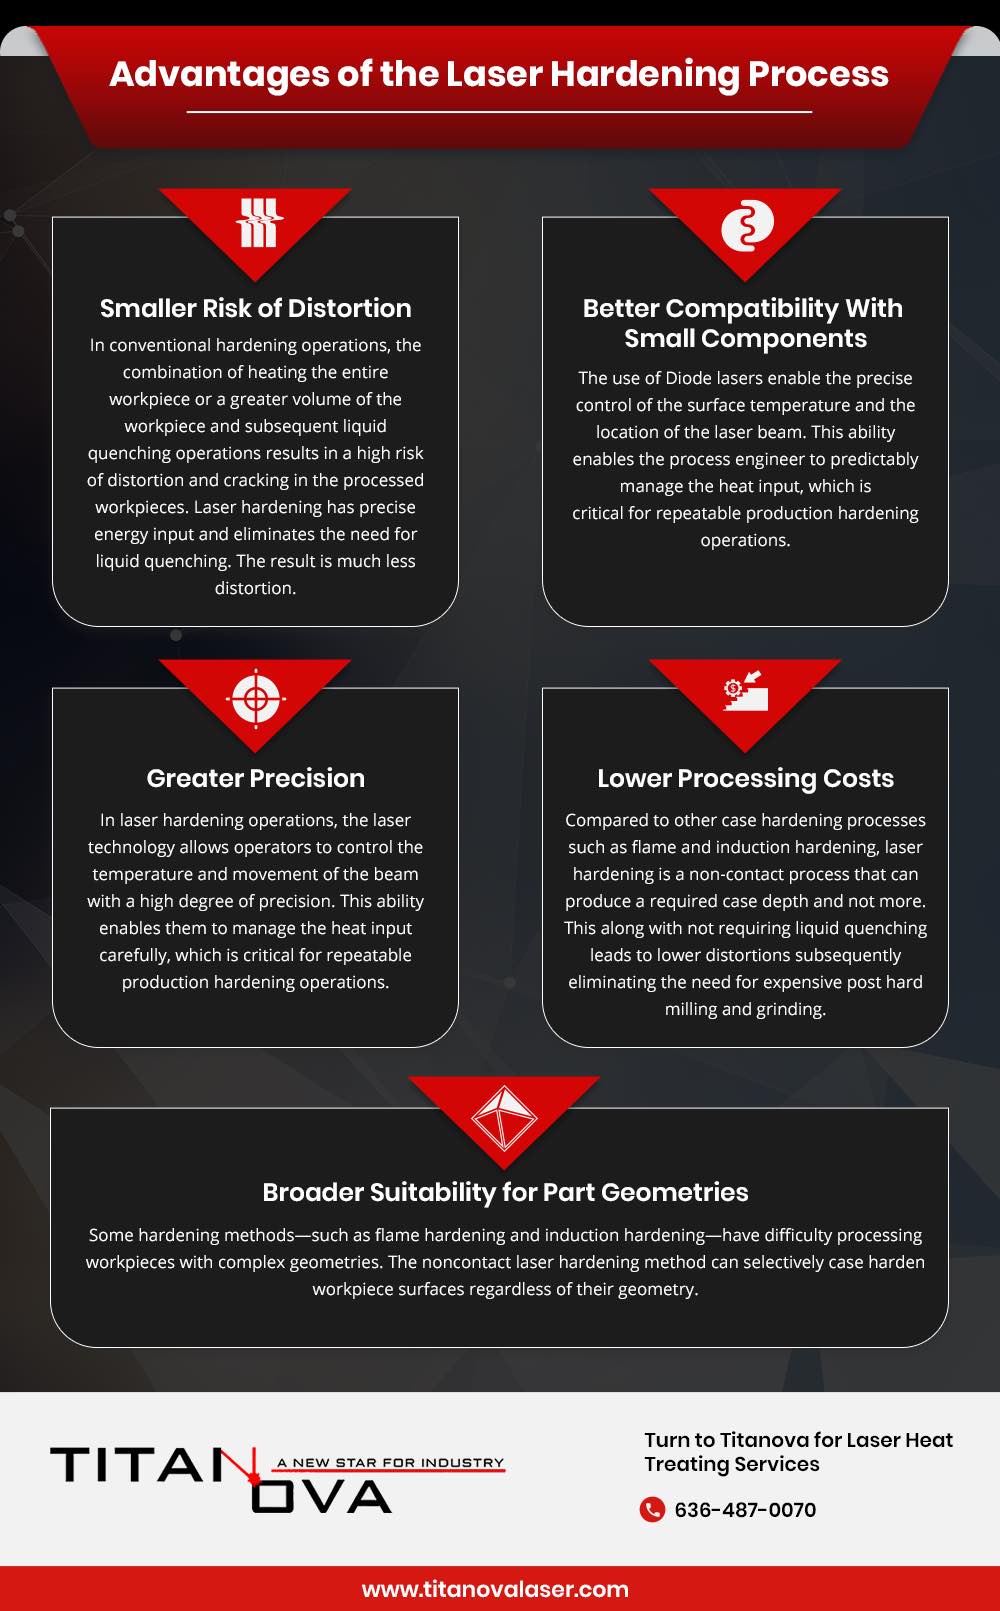 Advantages of laser hardening process infographic